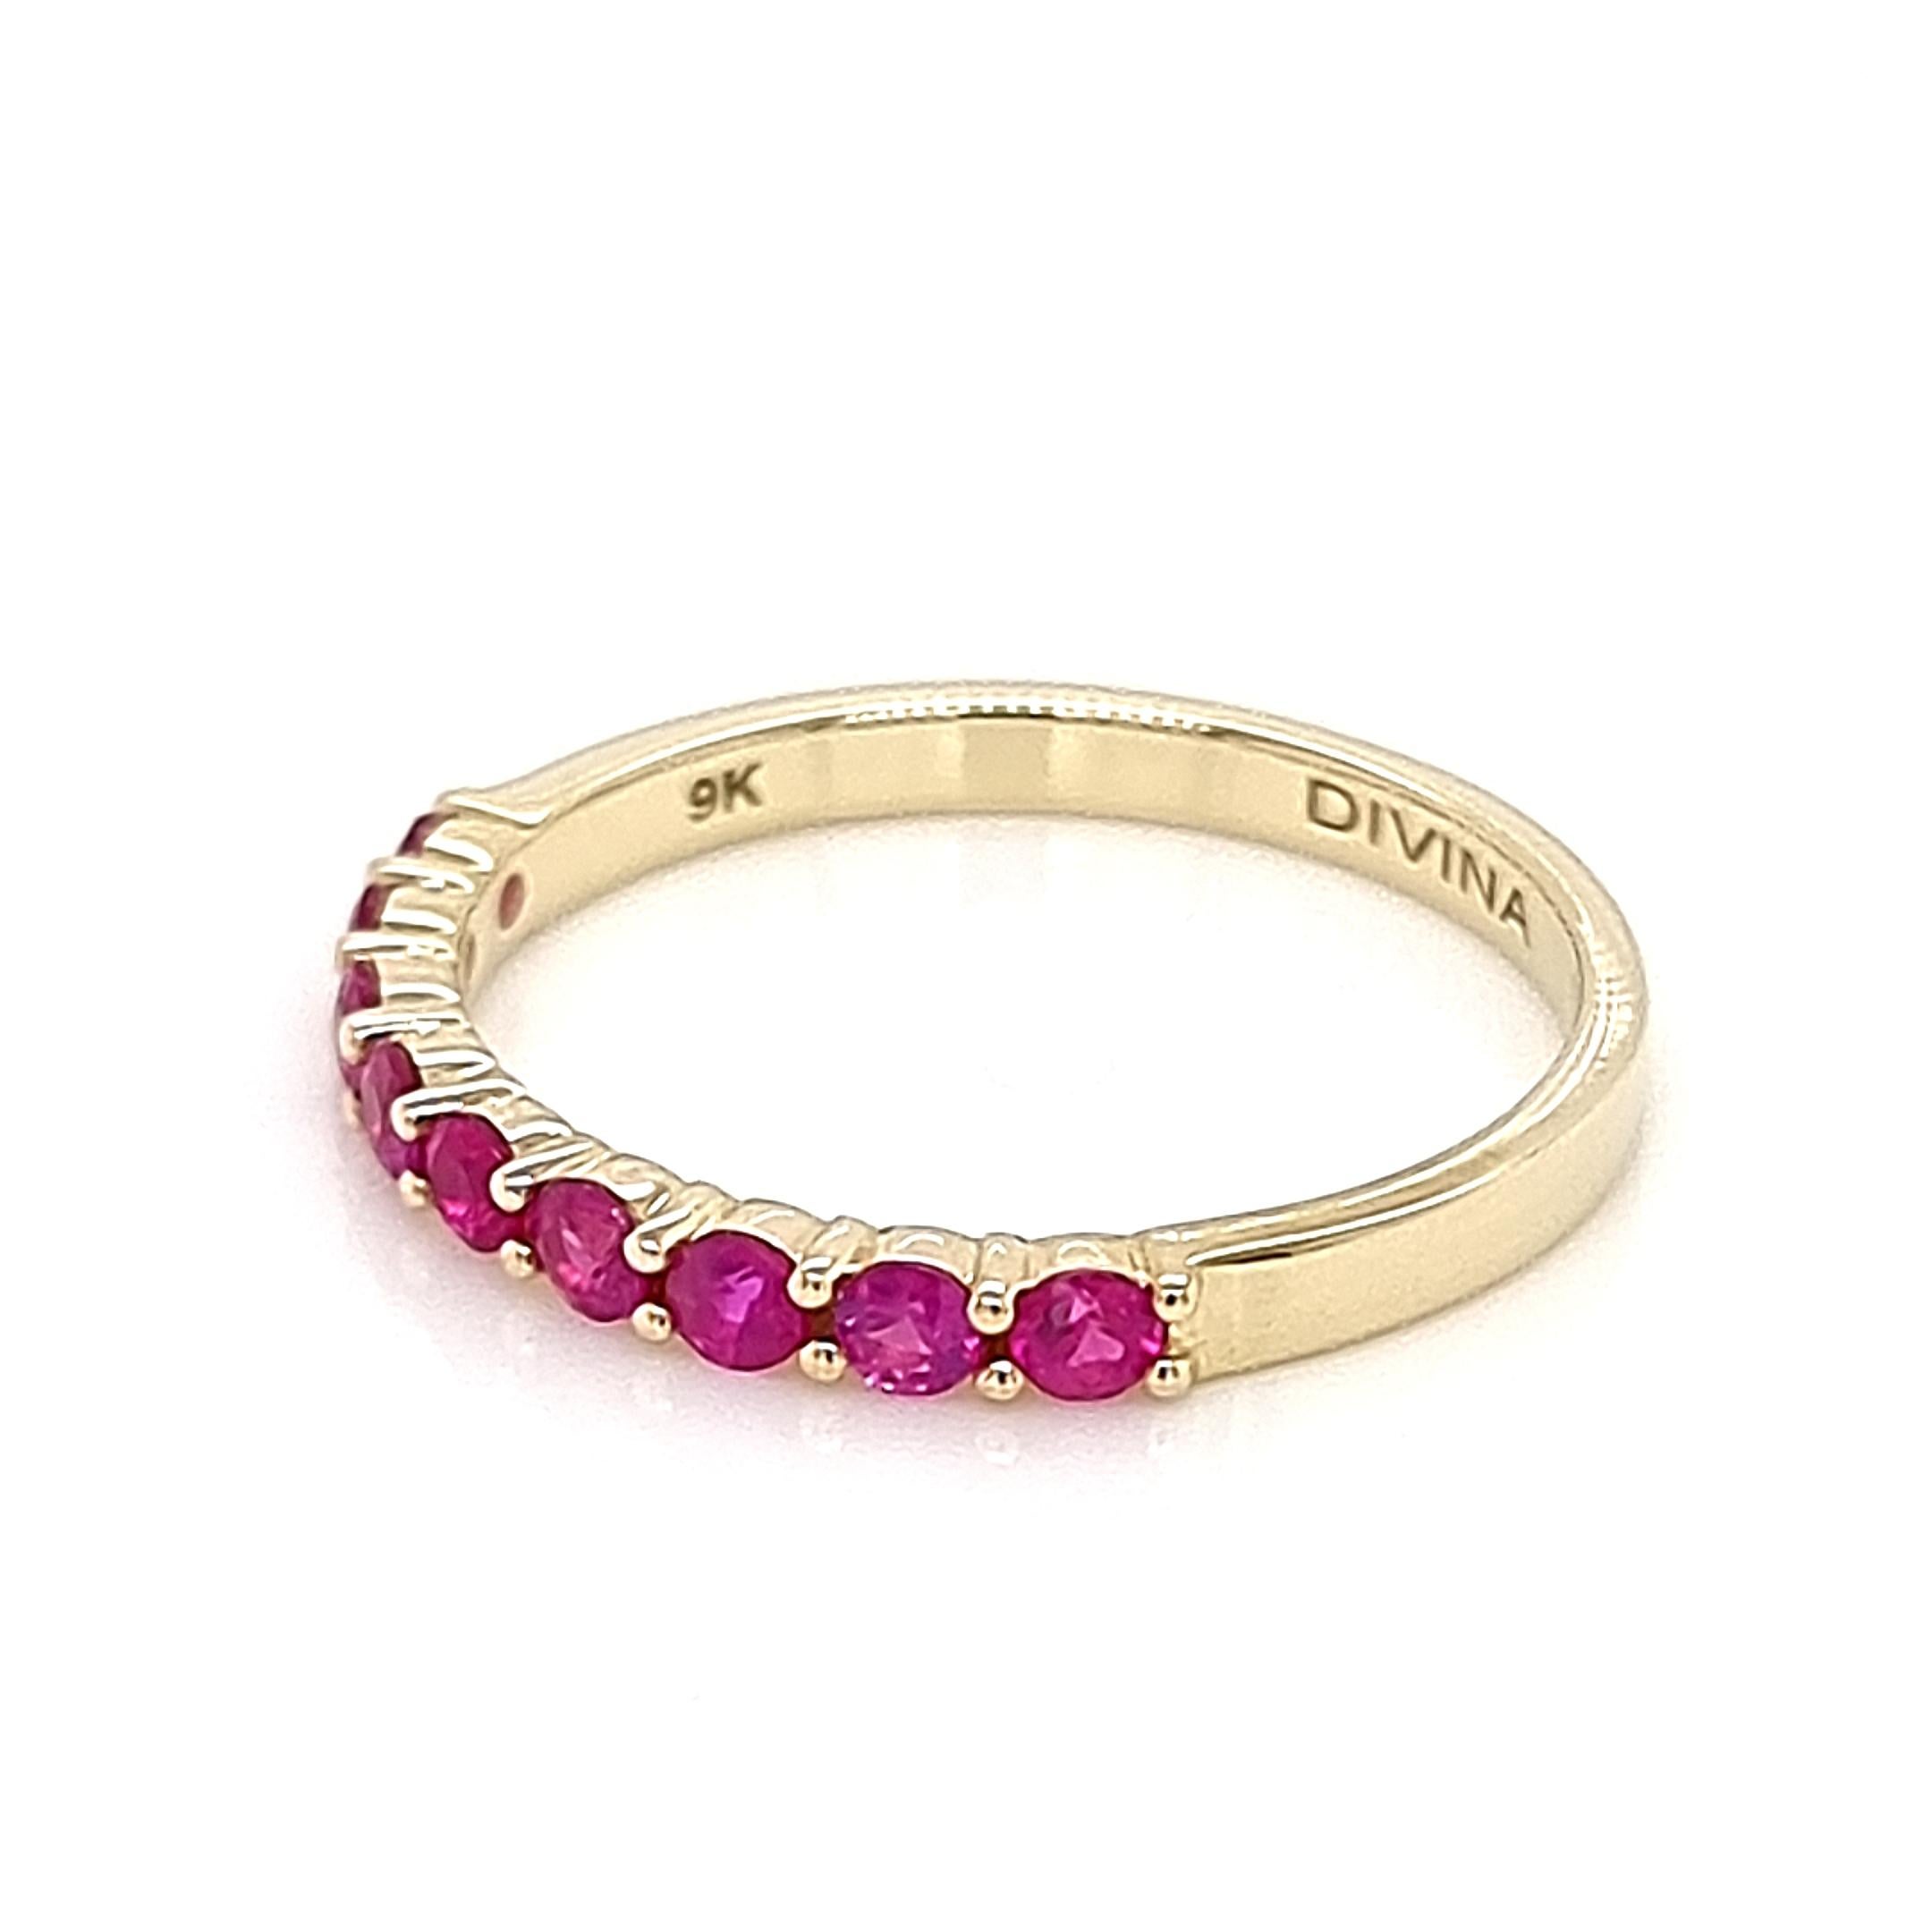 Introducing the epitome of cuteness and elegance, this enchanting 9K yellow gold half shank band showcases a delightful design with natural rubies, infusing a playful charm into its allure. The fusion of the dainty half shank and the vibrant rubies